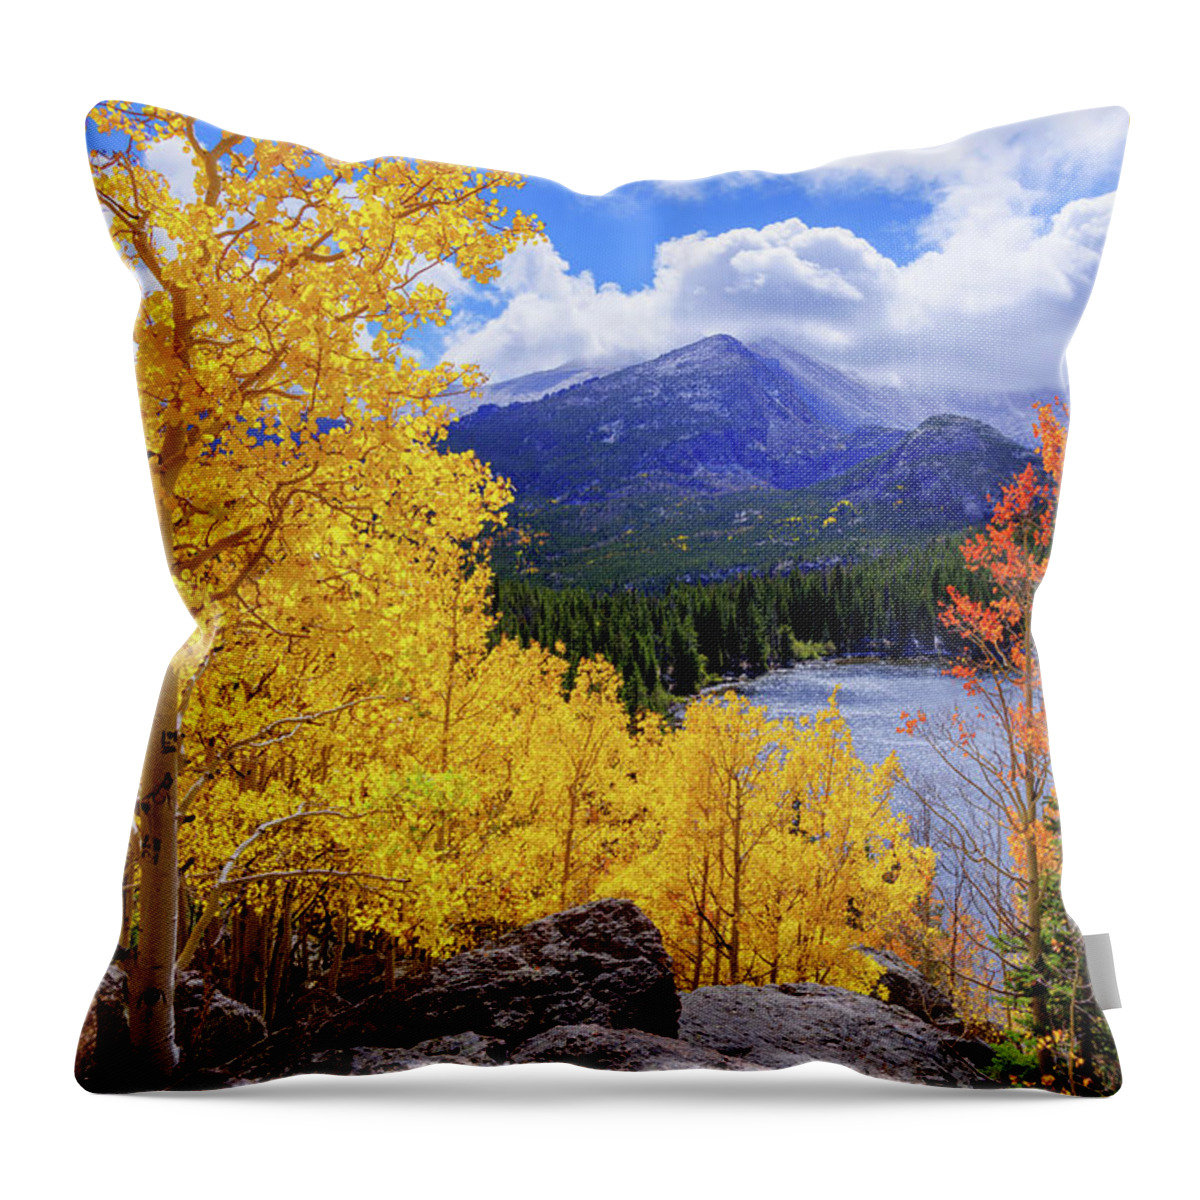 Time Throw Pillow featuring the photograph Time by Chad Dutson